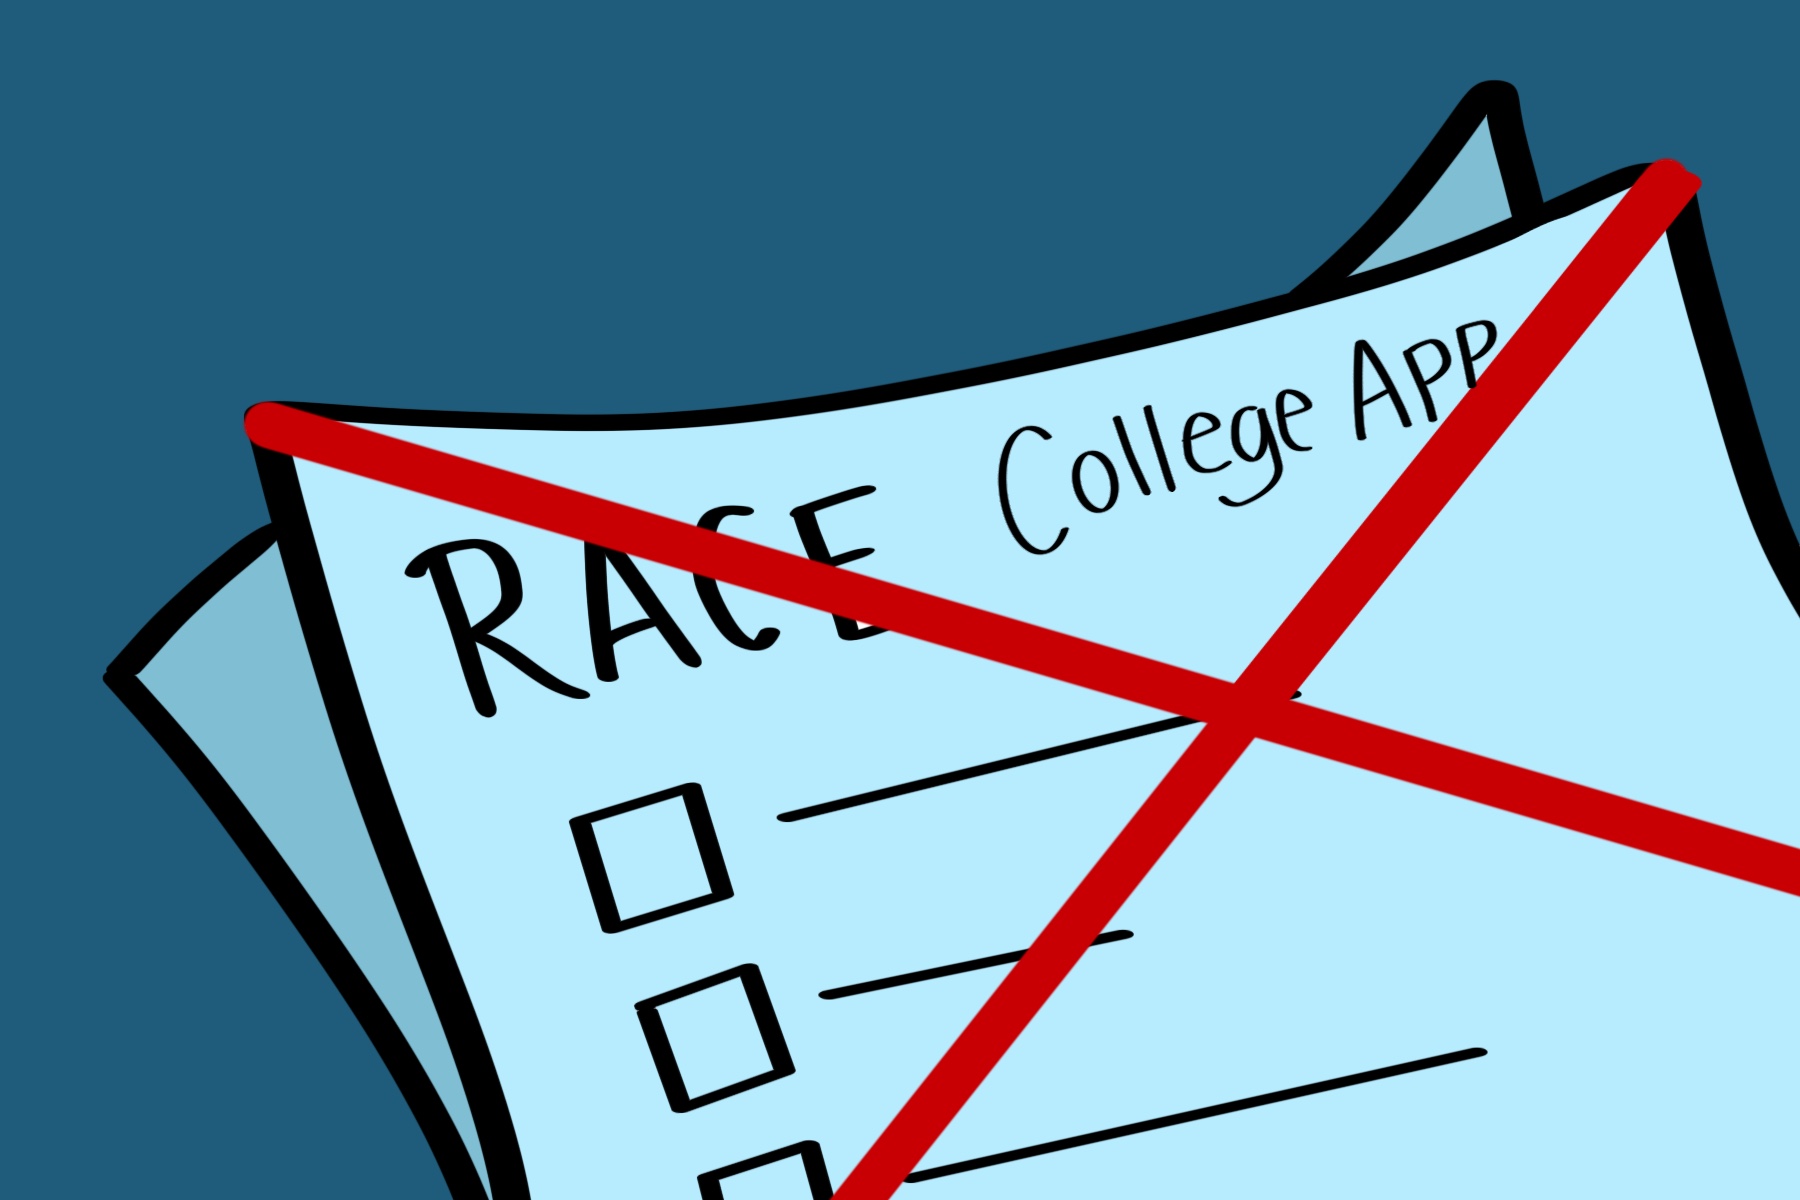 In a 6-3 Supreme Court ruling, affirmative action was deemed unconstitutional. The effect of this ruling will be visible this coming college cycle.